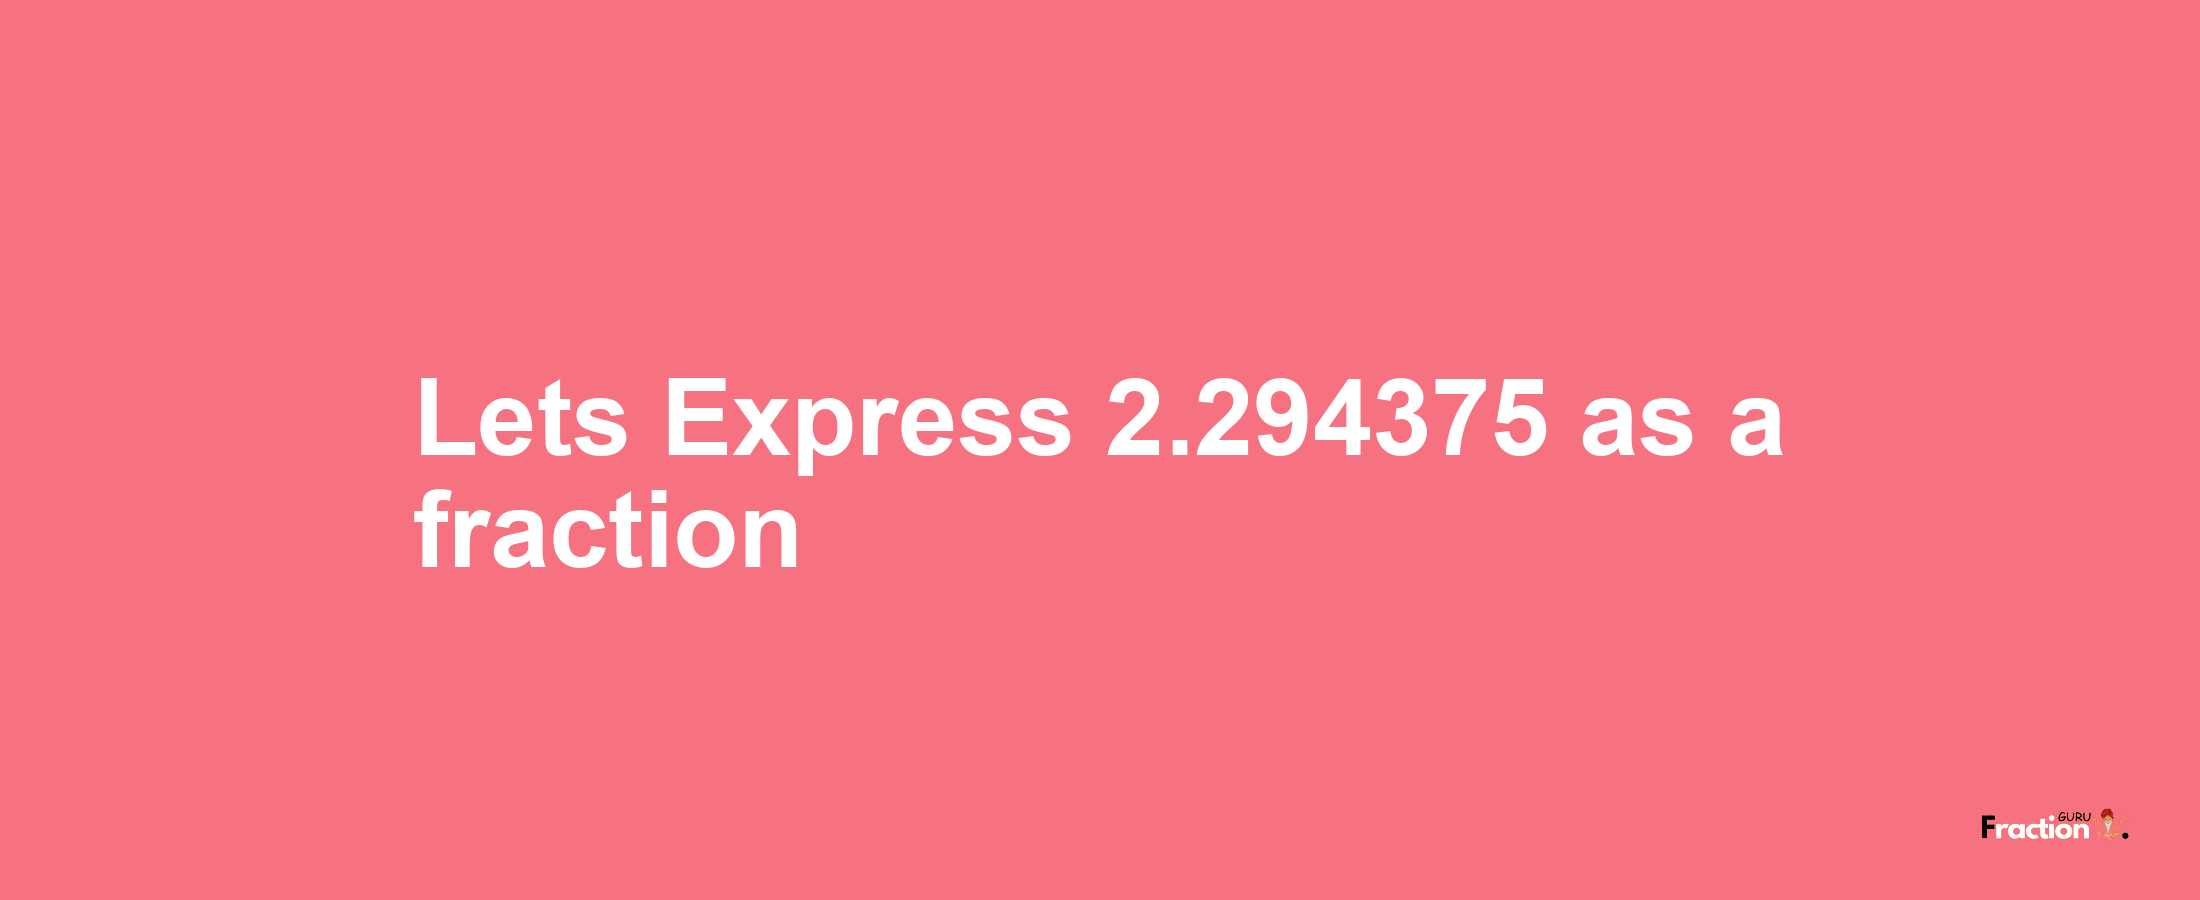 Lets Express 2.294375 as afraction